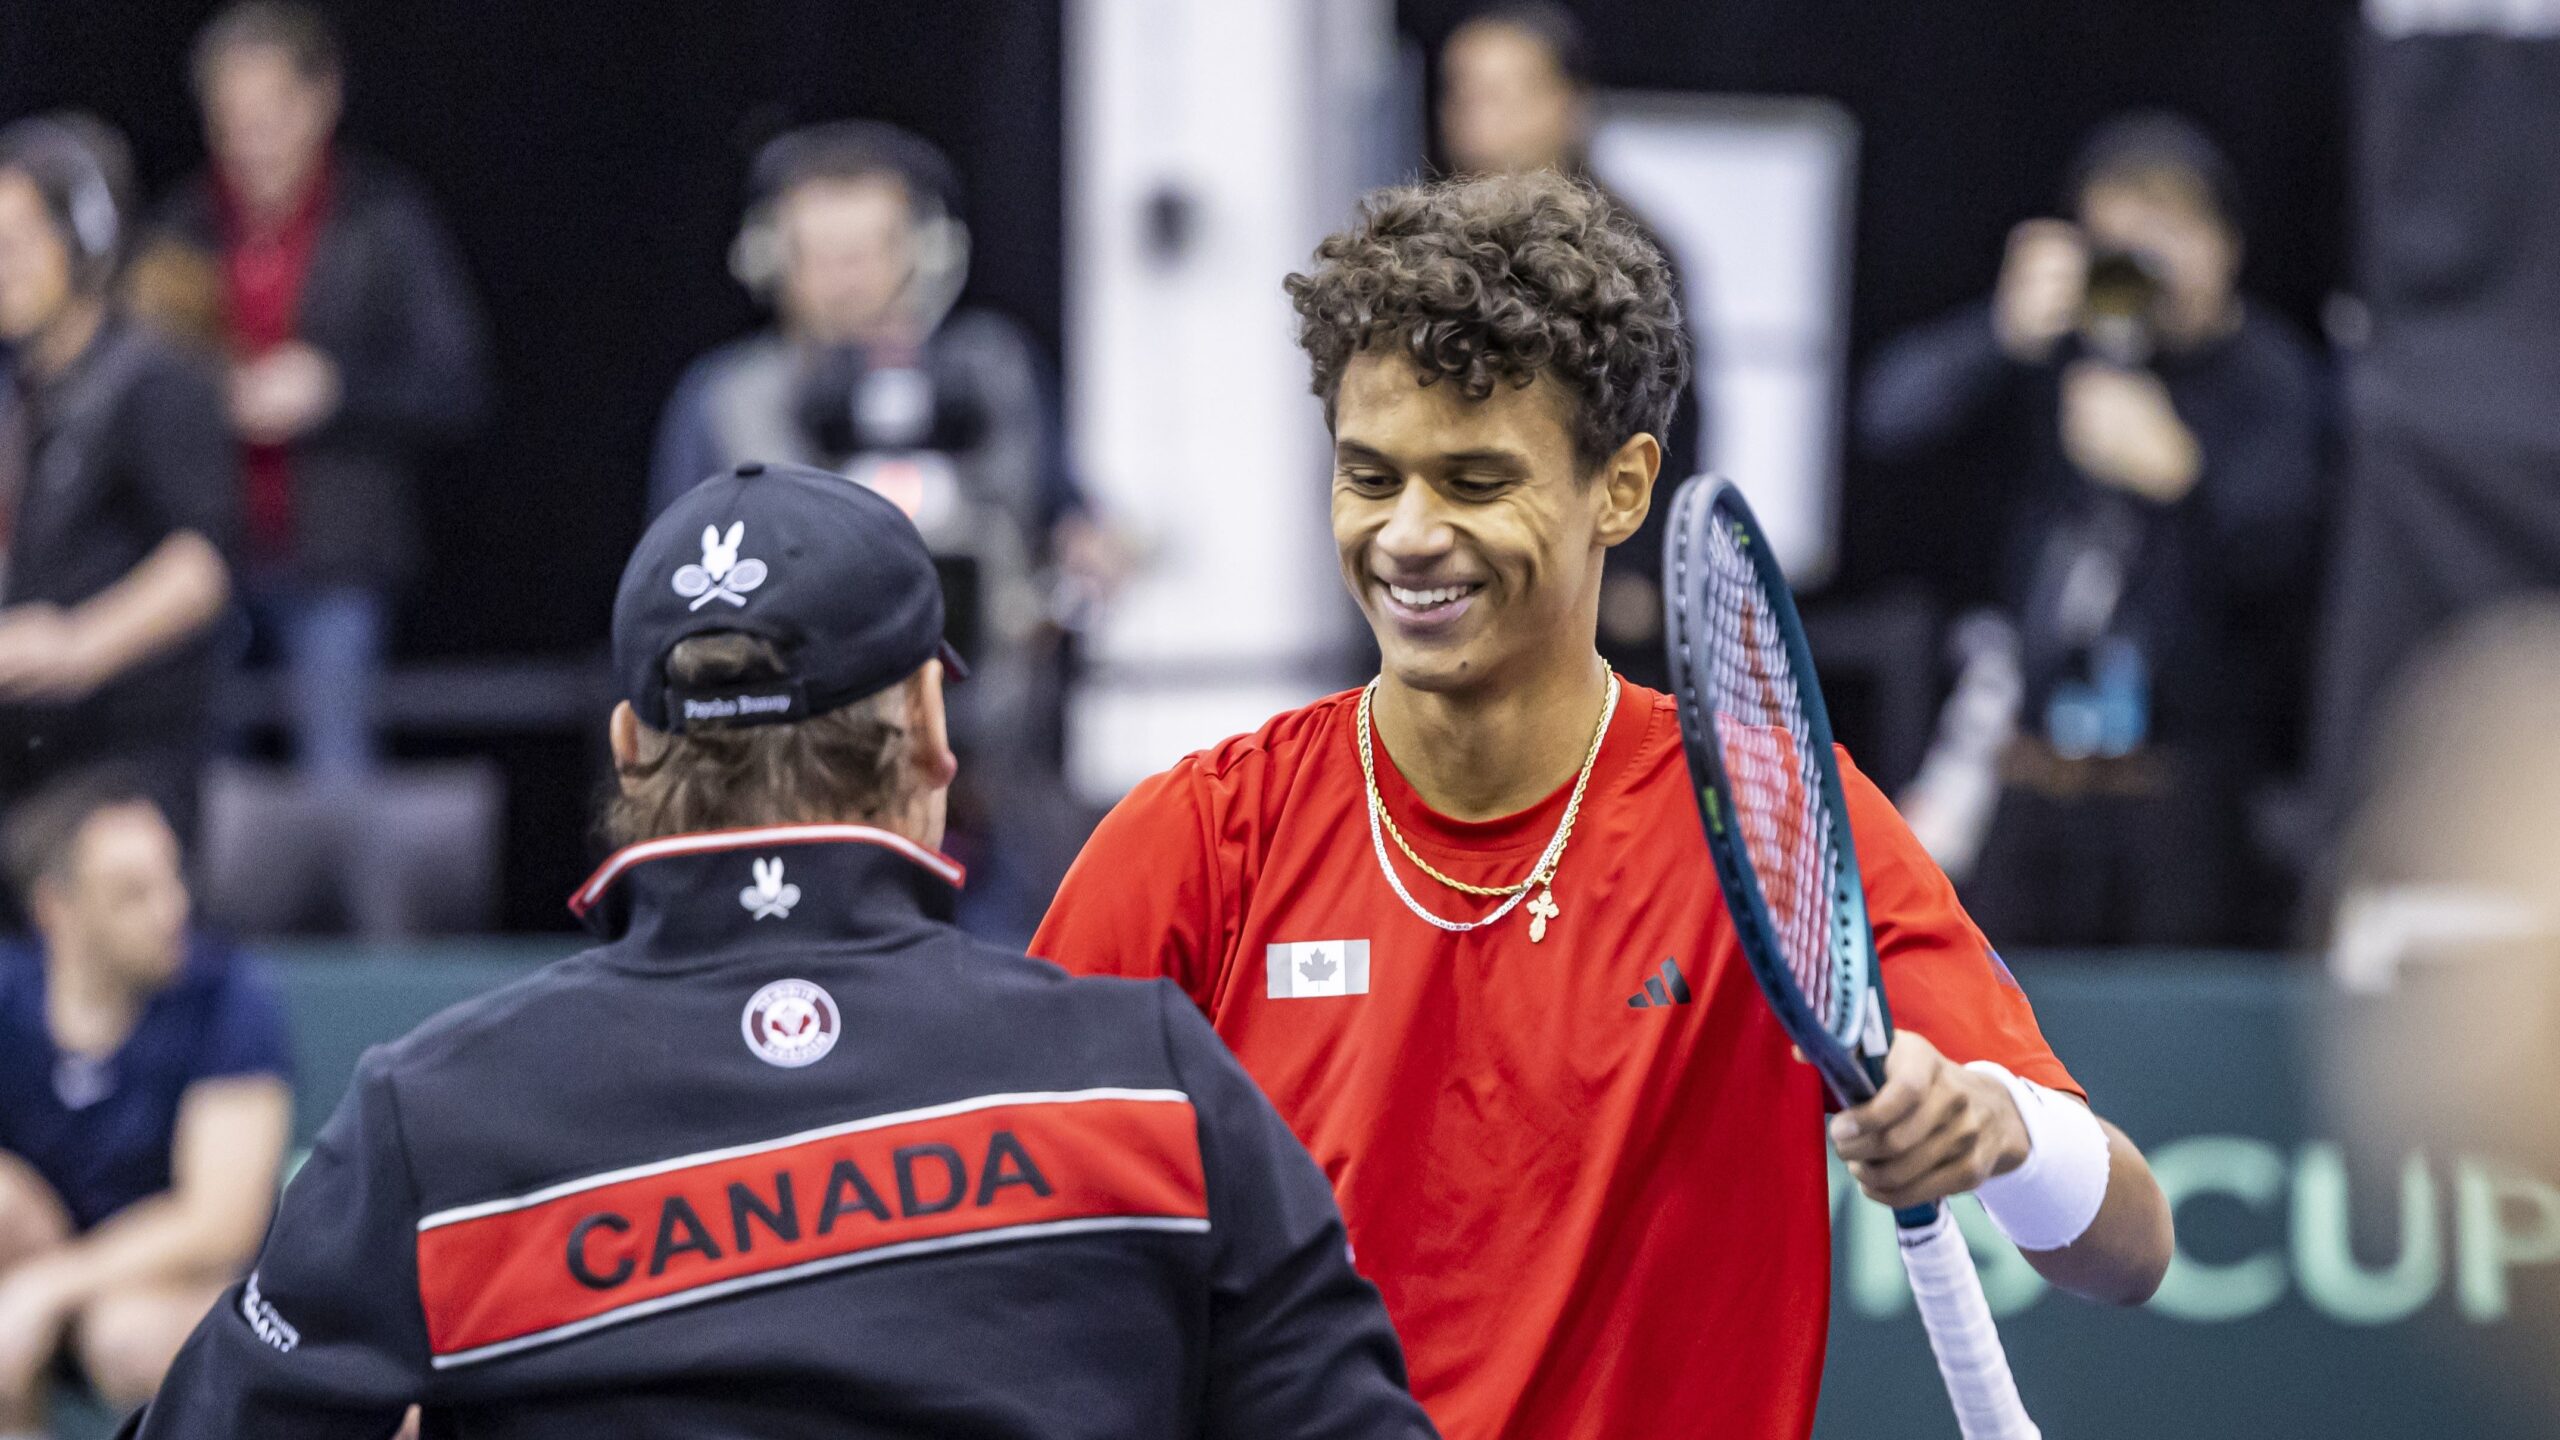 Canada completes its successful Davis Cup return in Montreal